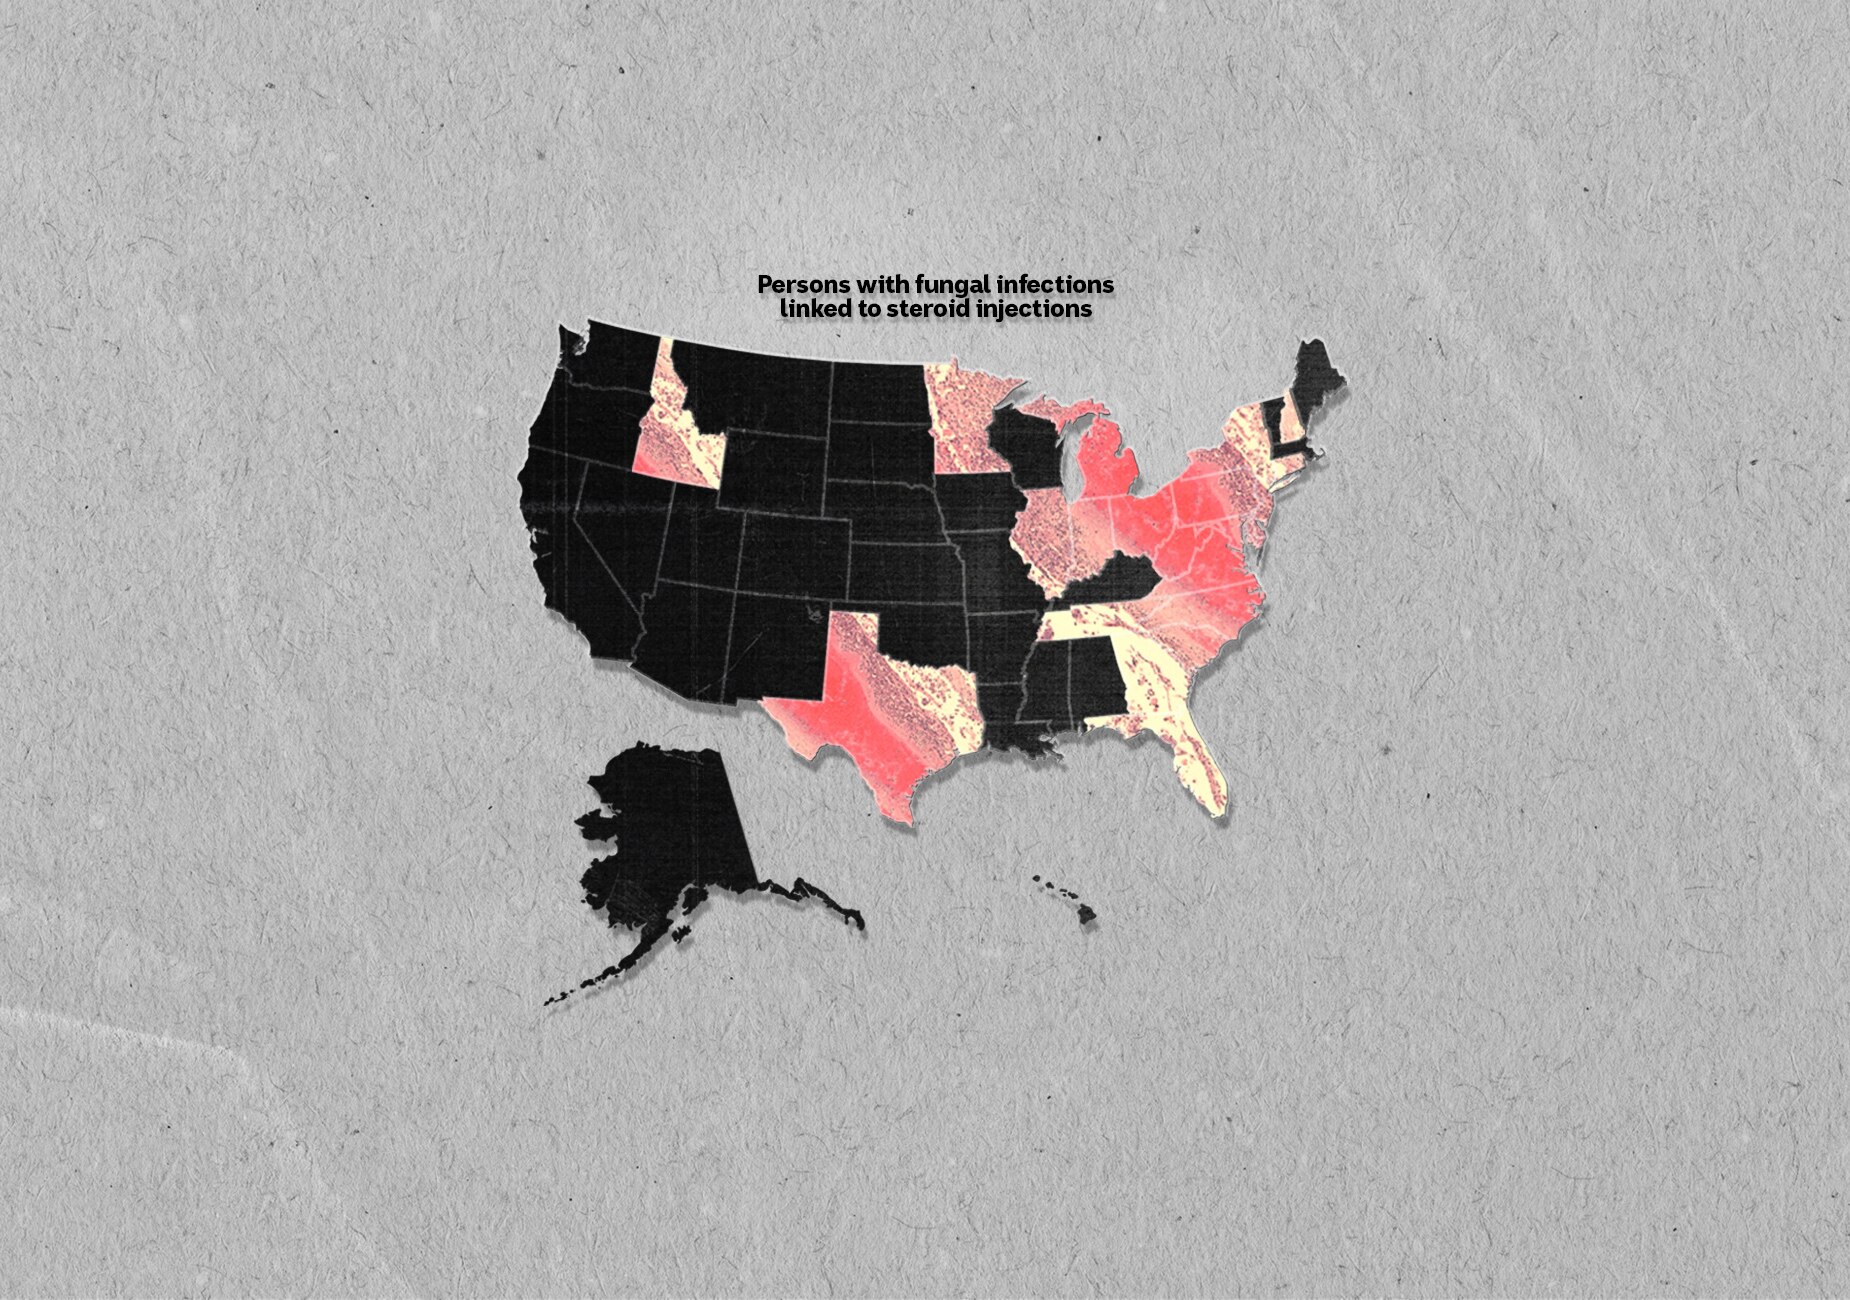 Pink bacteria image overlaid on various US states on black vector US map on grey paper background.